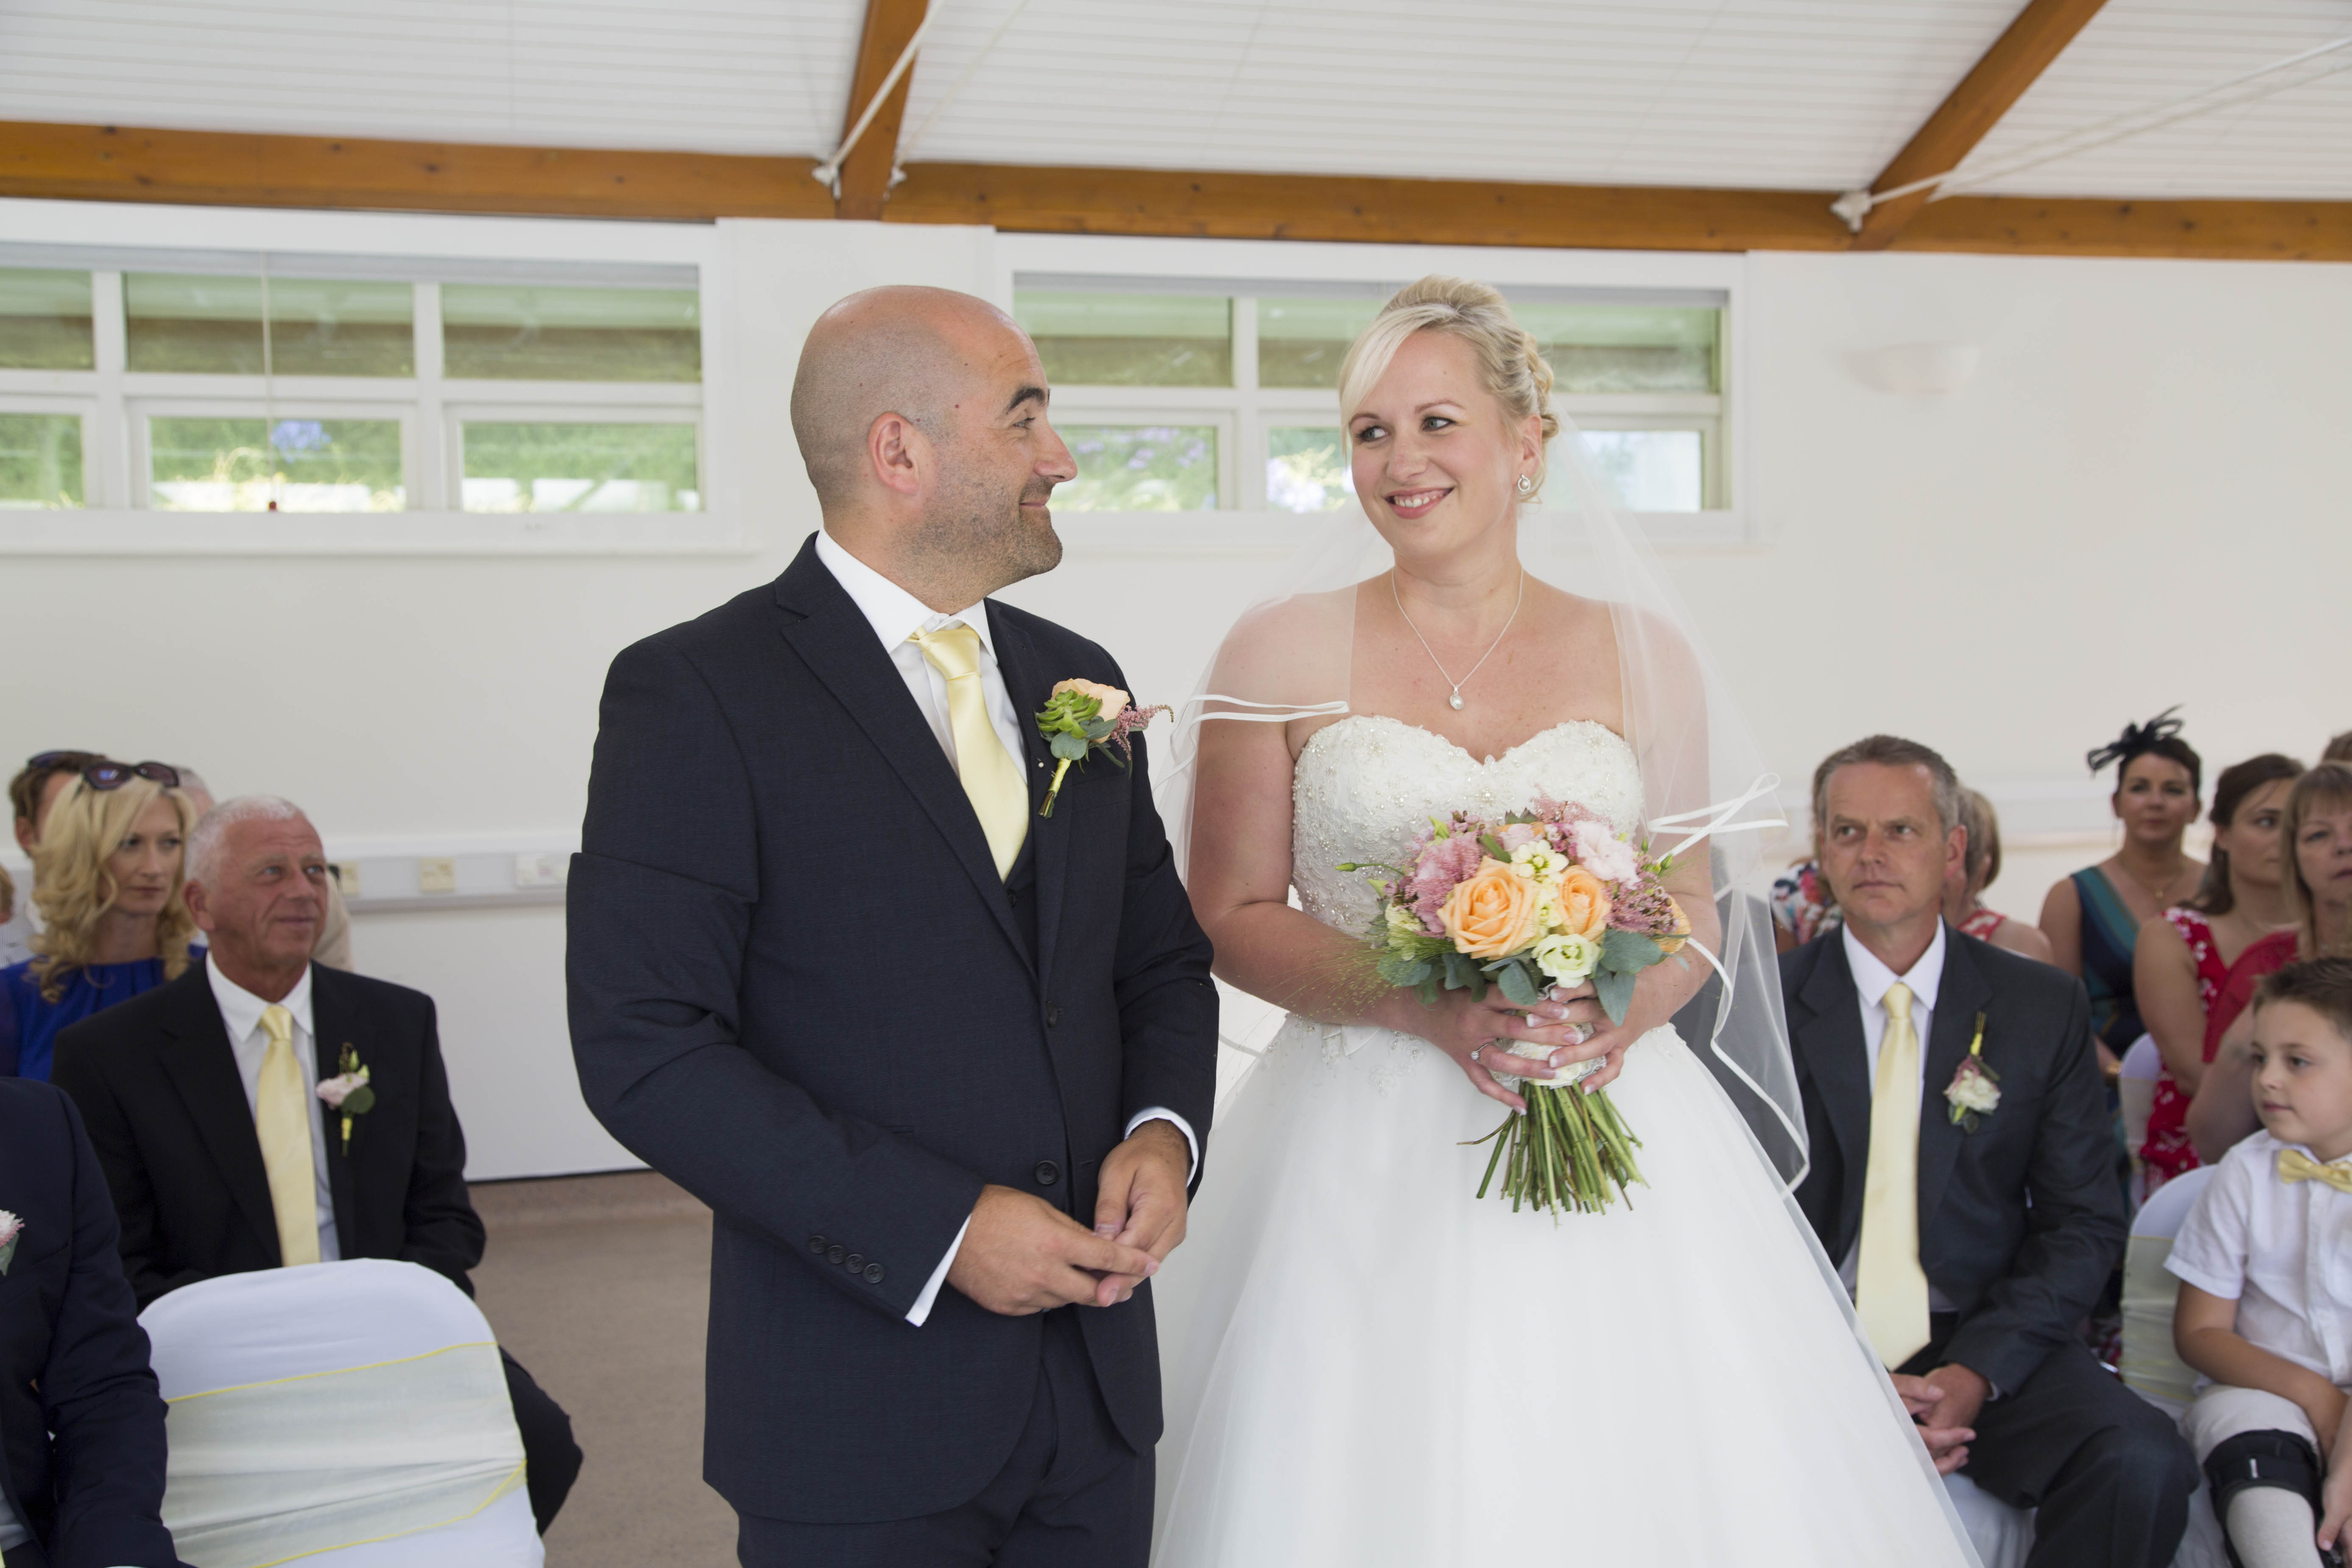  Isle of Wight Wedding and Portrait Photographer - Holly Cade Photography